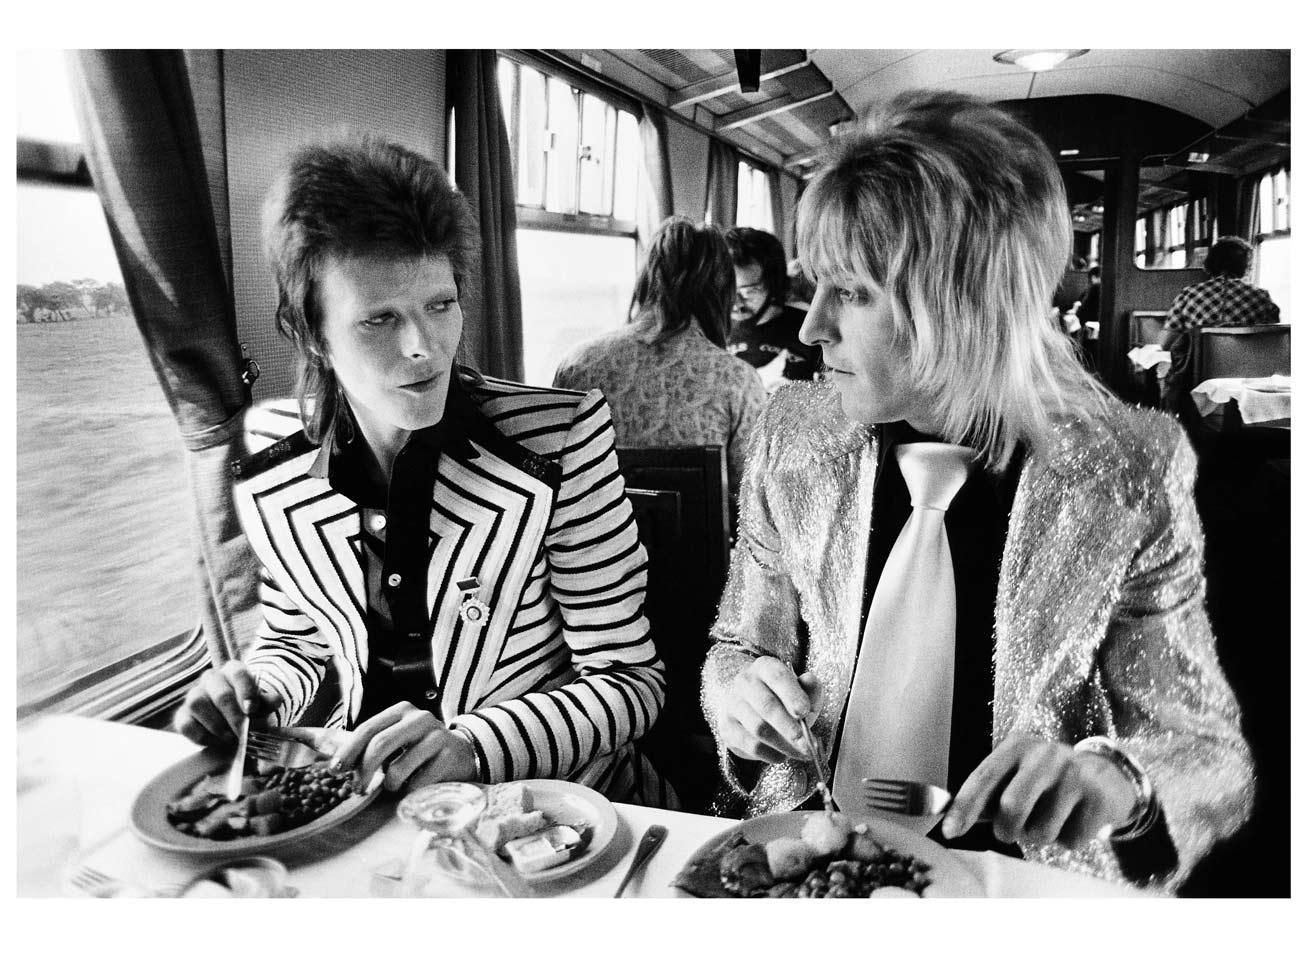 Mick Rock Portrait Photograph - David Bowie and Ronson. Lunch on train to Aberdeen